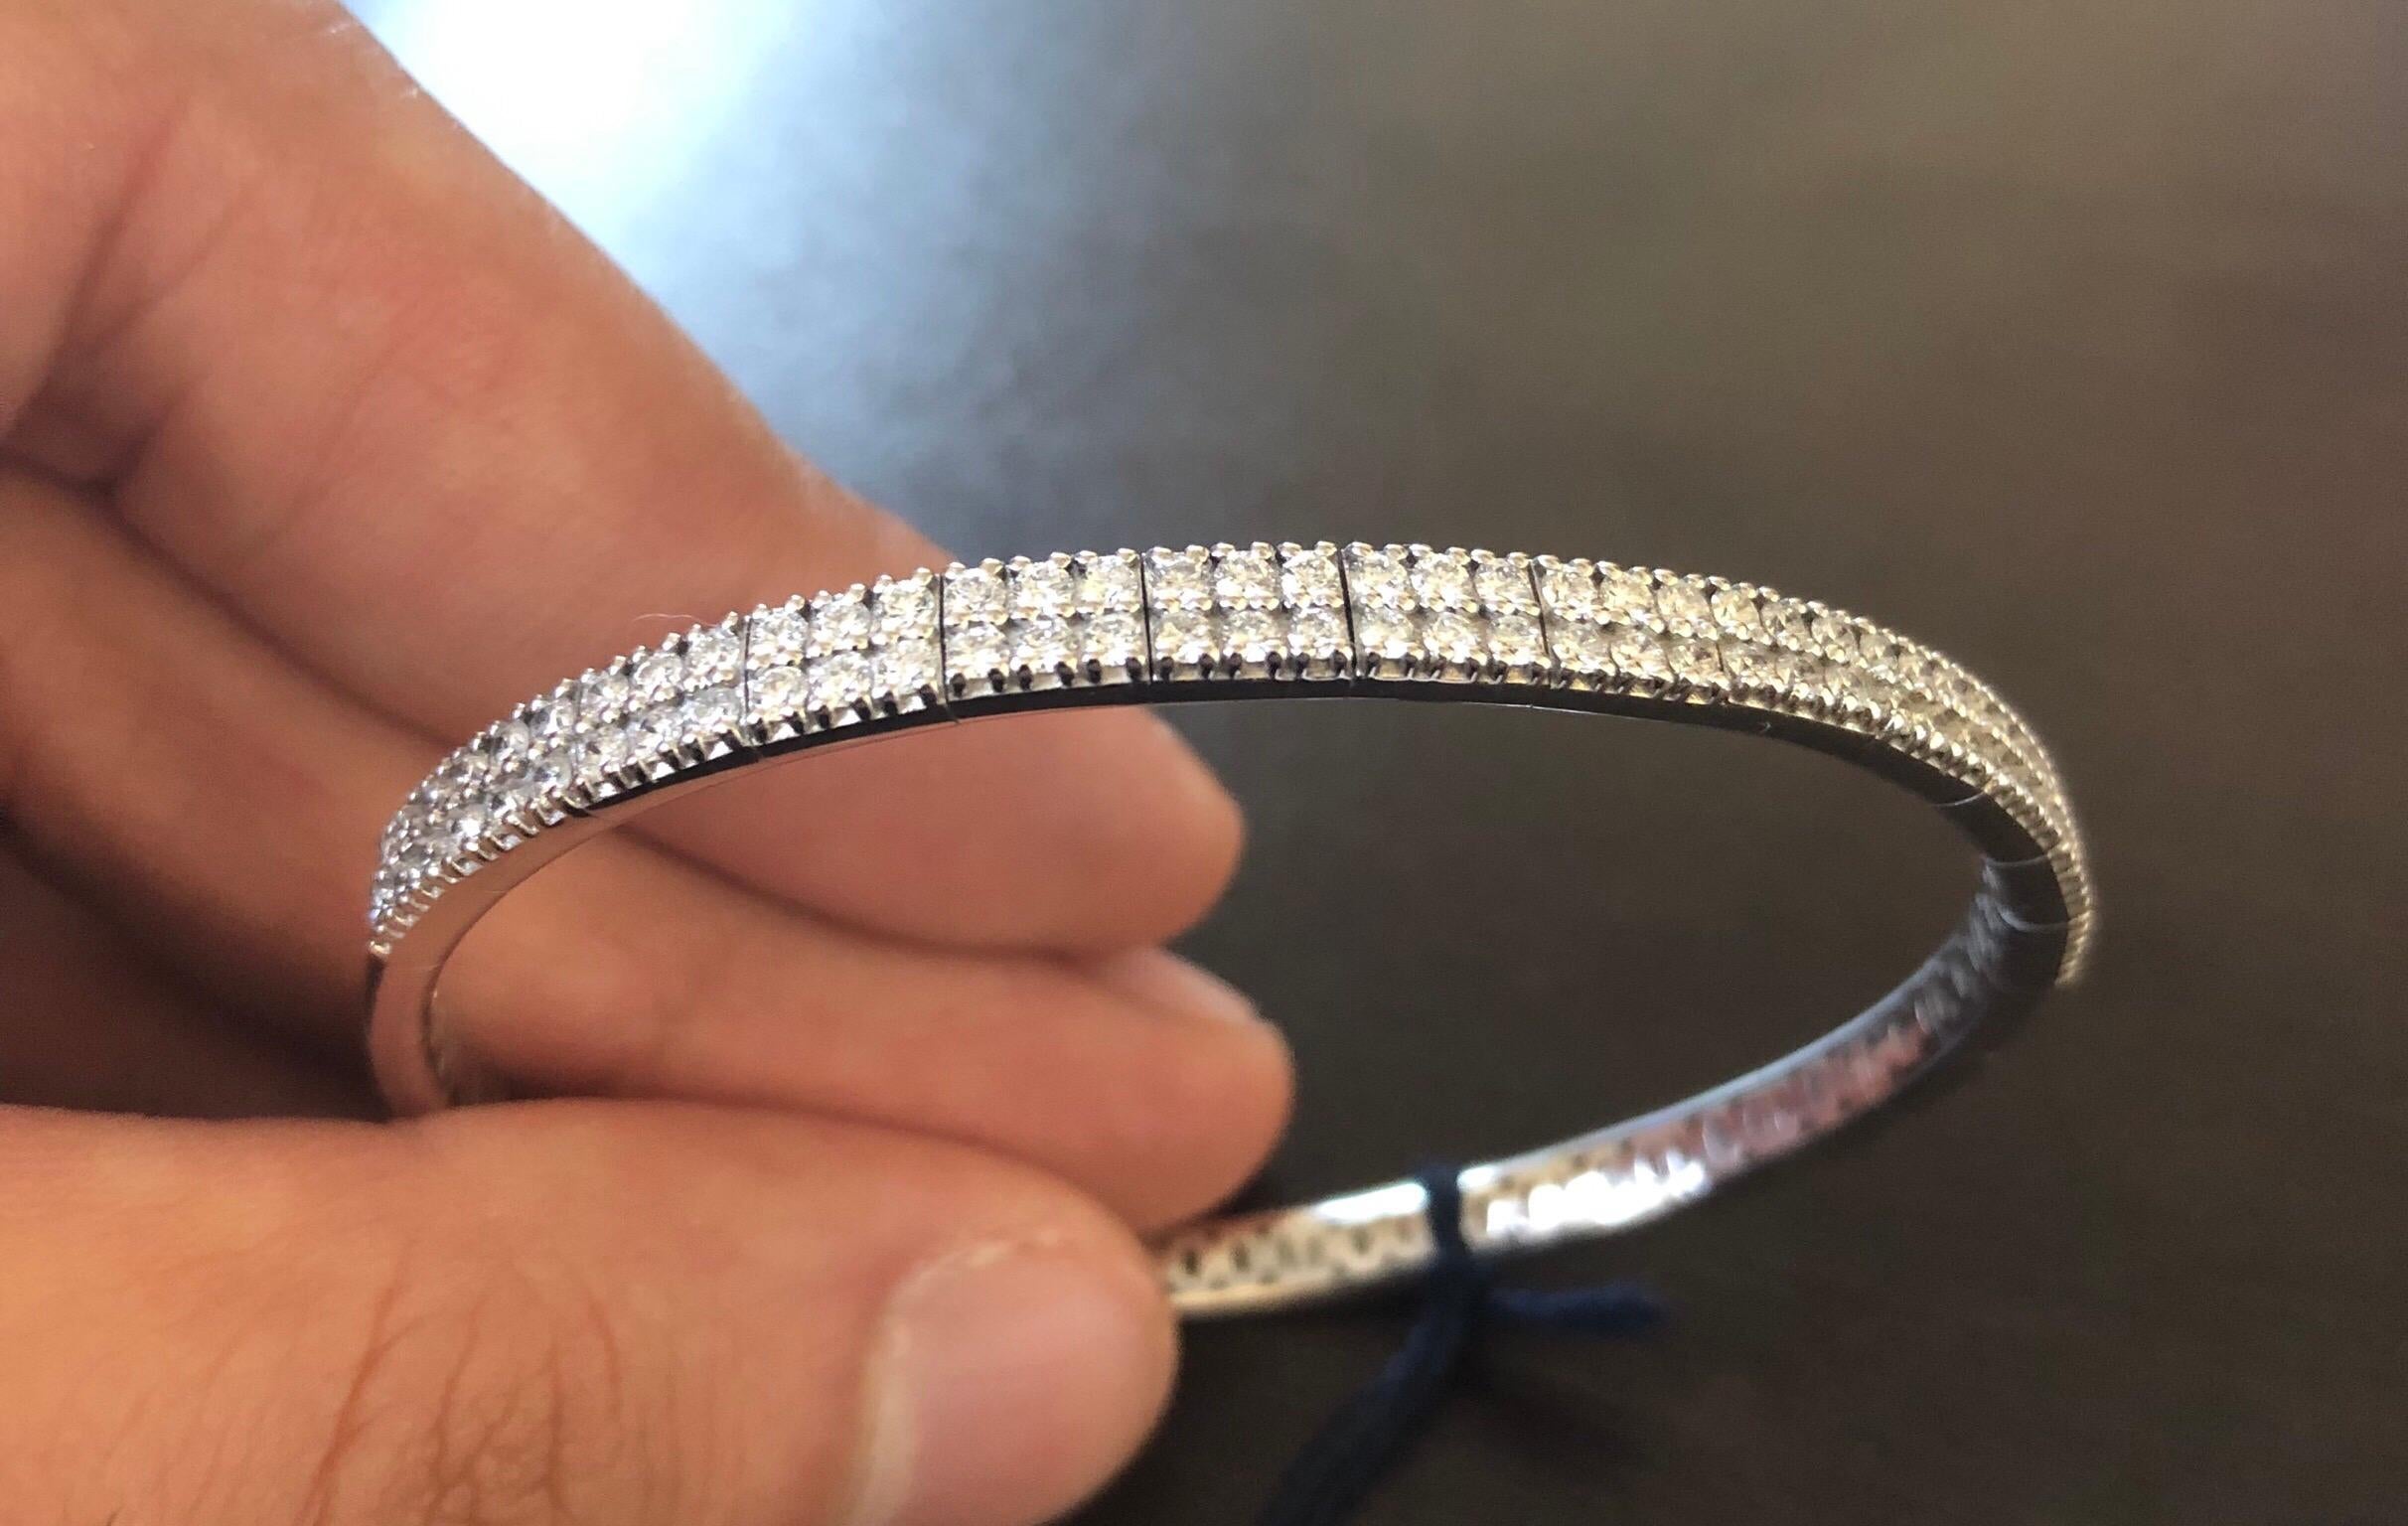 Italian diamond bangle flexible set in 14K white gold. The bangle is set with 2 rows of diamonds half-way. The total diamond weight is 1.56 carats. The color of the stones are F-G, the clarity is VS1-VS2.